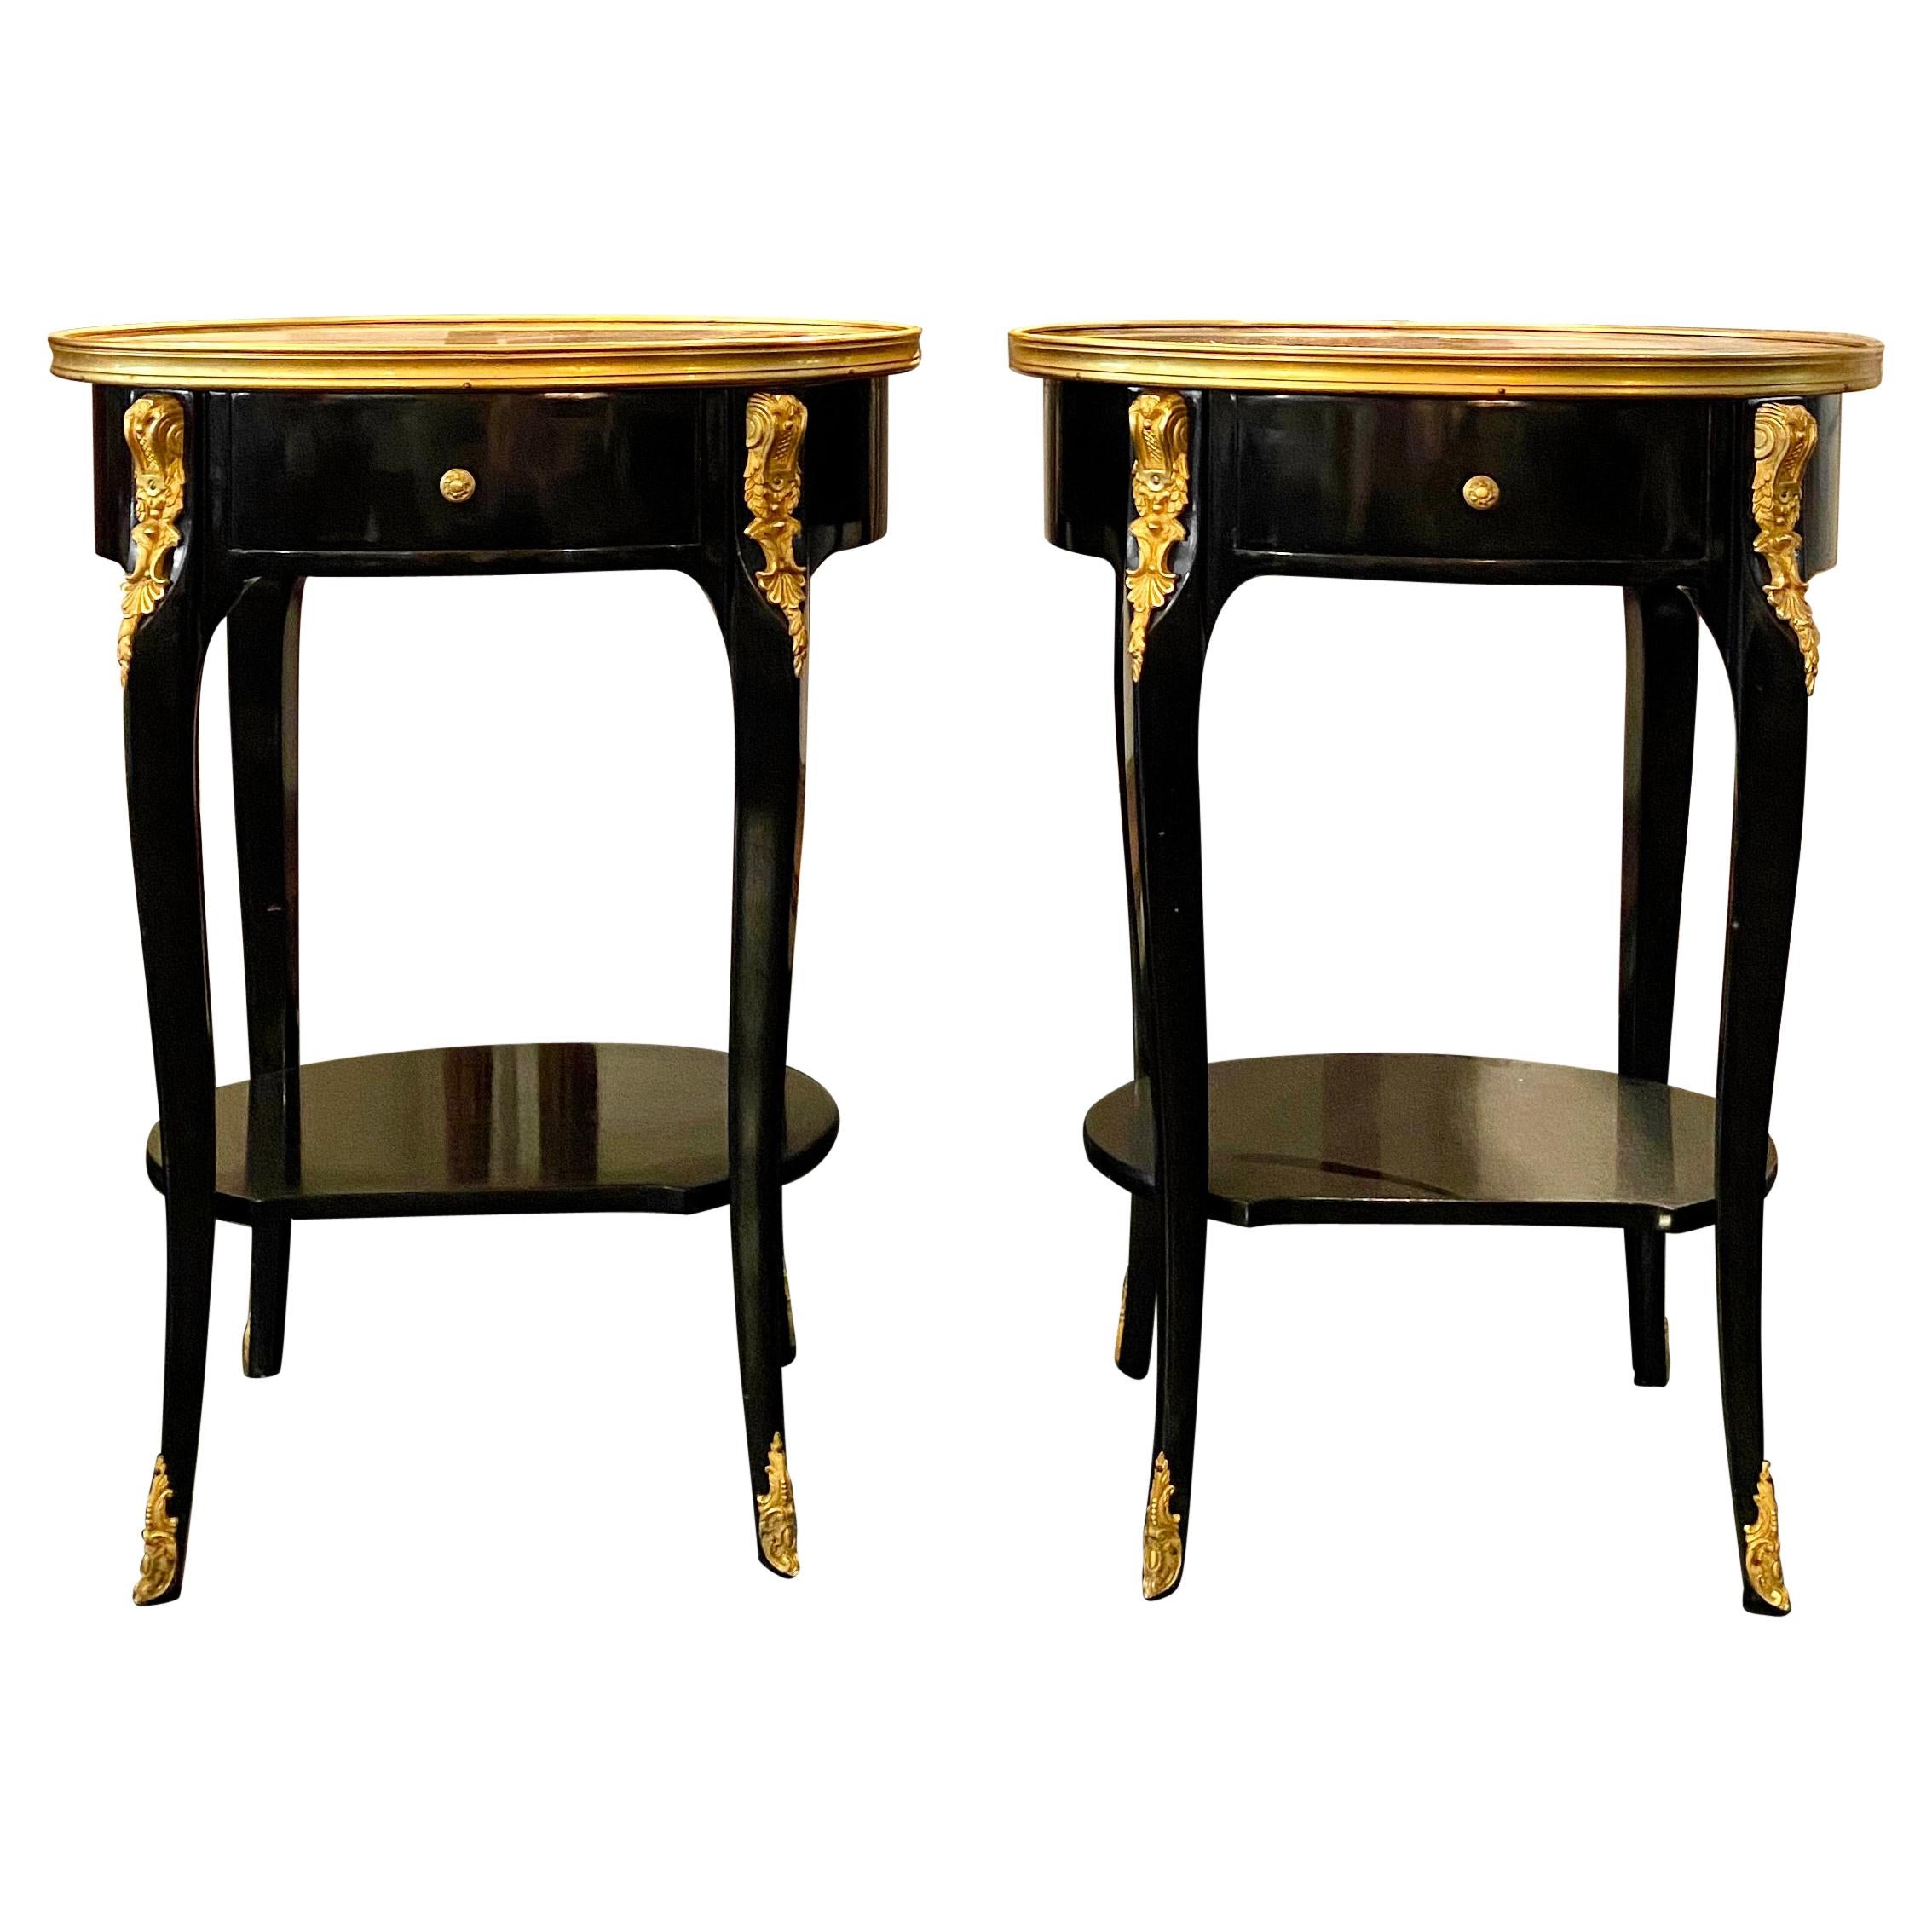 Pair of Louis XV Style Ebonized Side Tables with Marble Tops and Ormulu Mounts